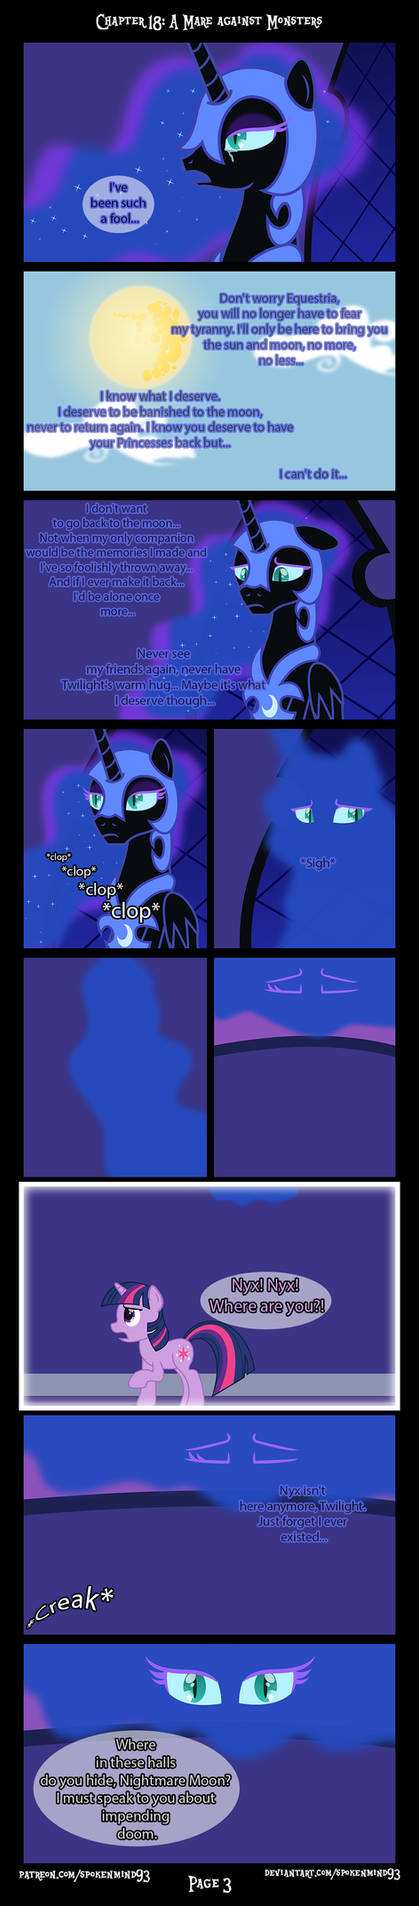 Past Sins: A Mare Against Monsters P3 by SpokenMind93 on DeviantArt